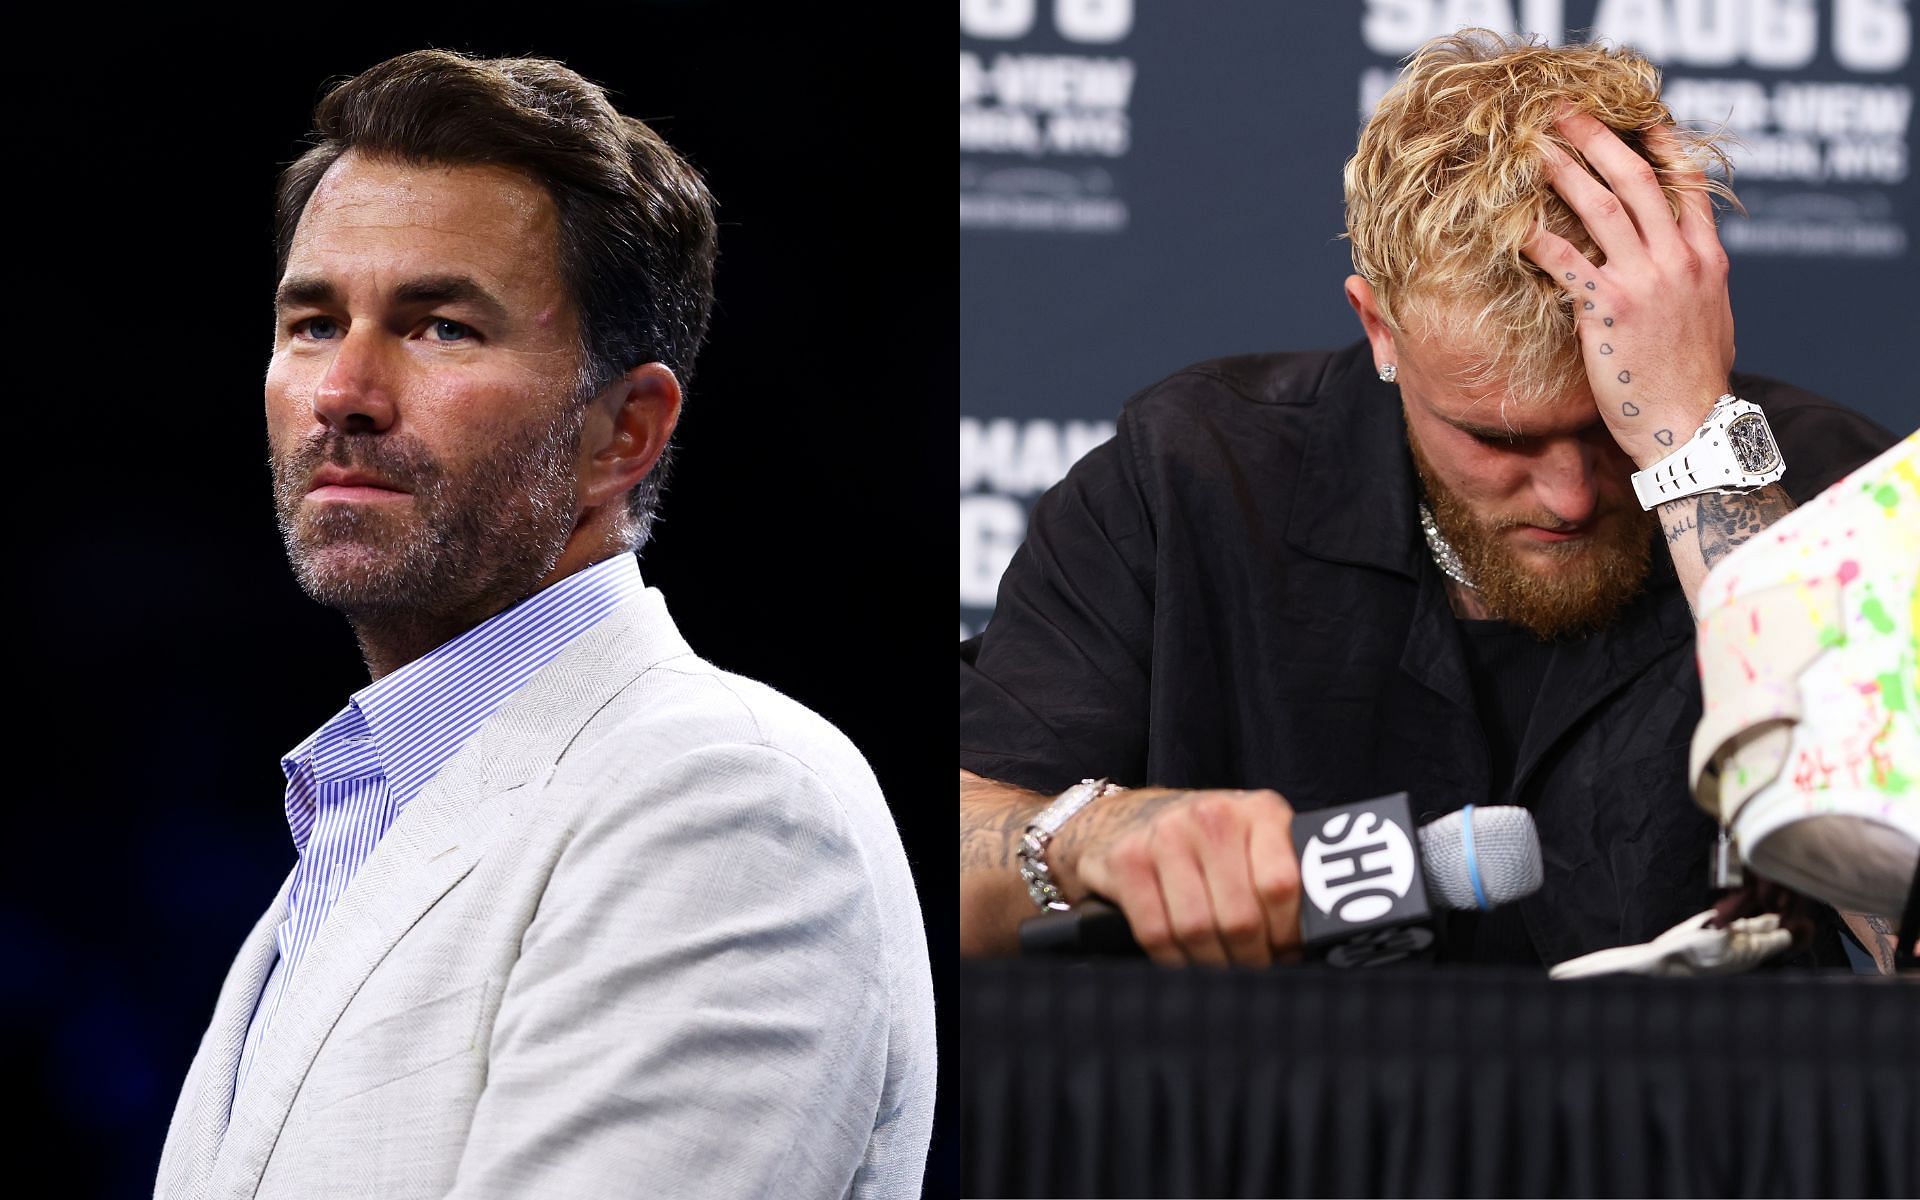 Eddie Hearn (left) and Jake Paul (right) (Image credits Getty Images)